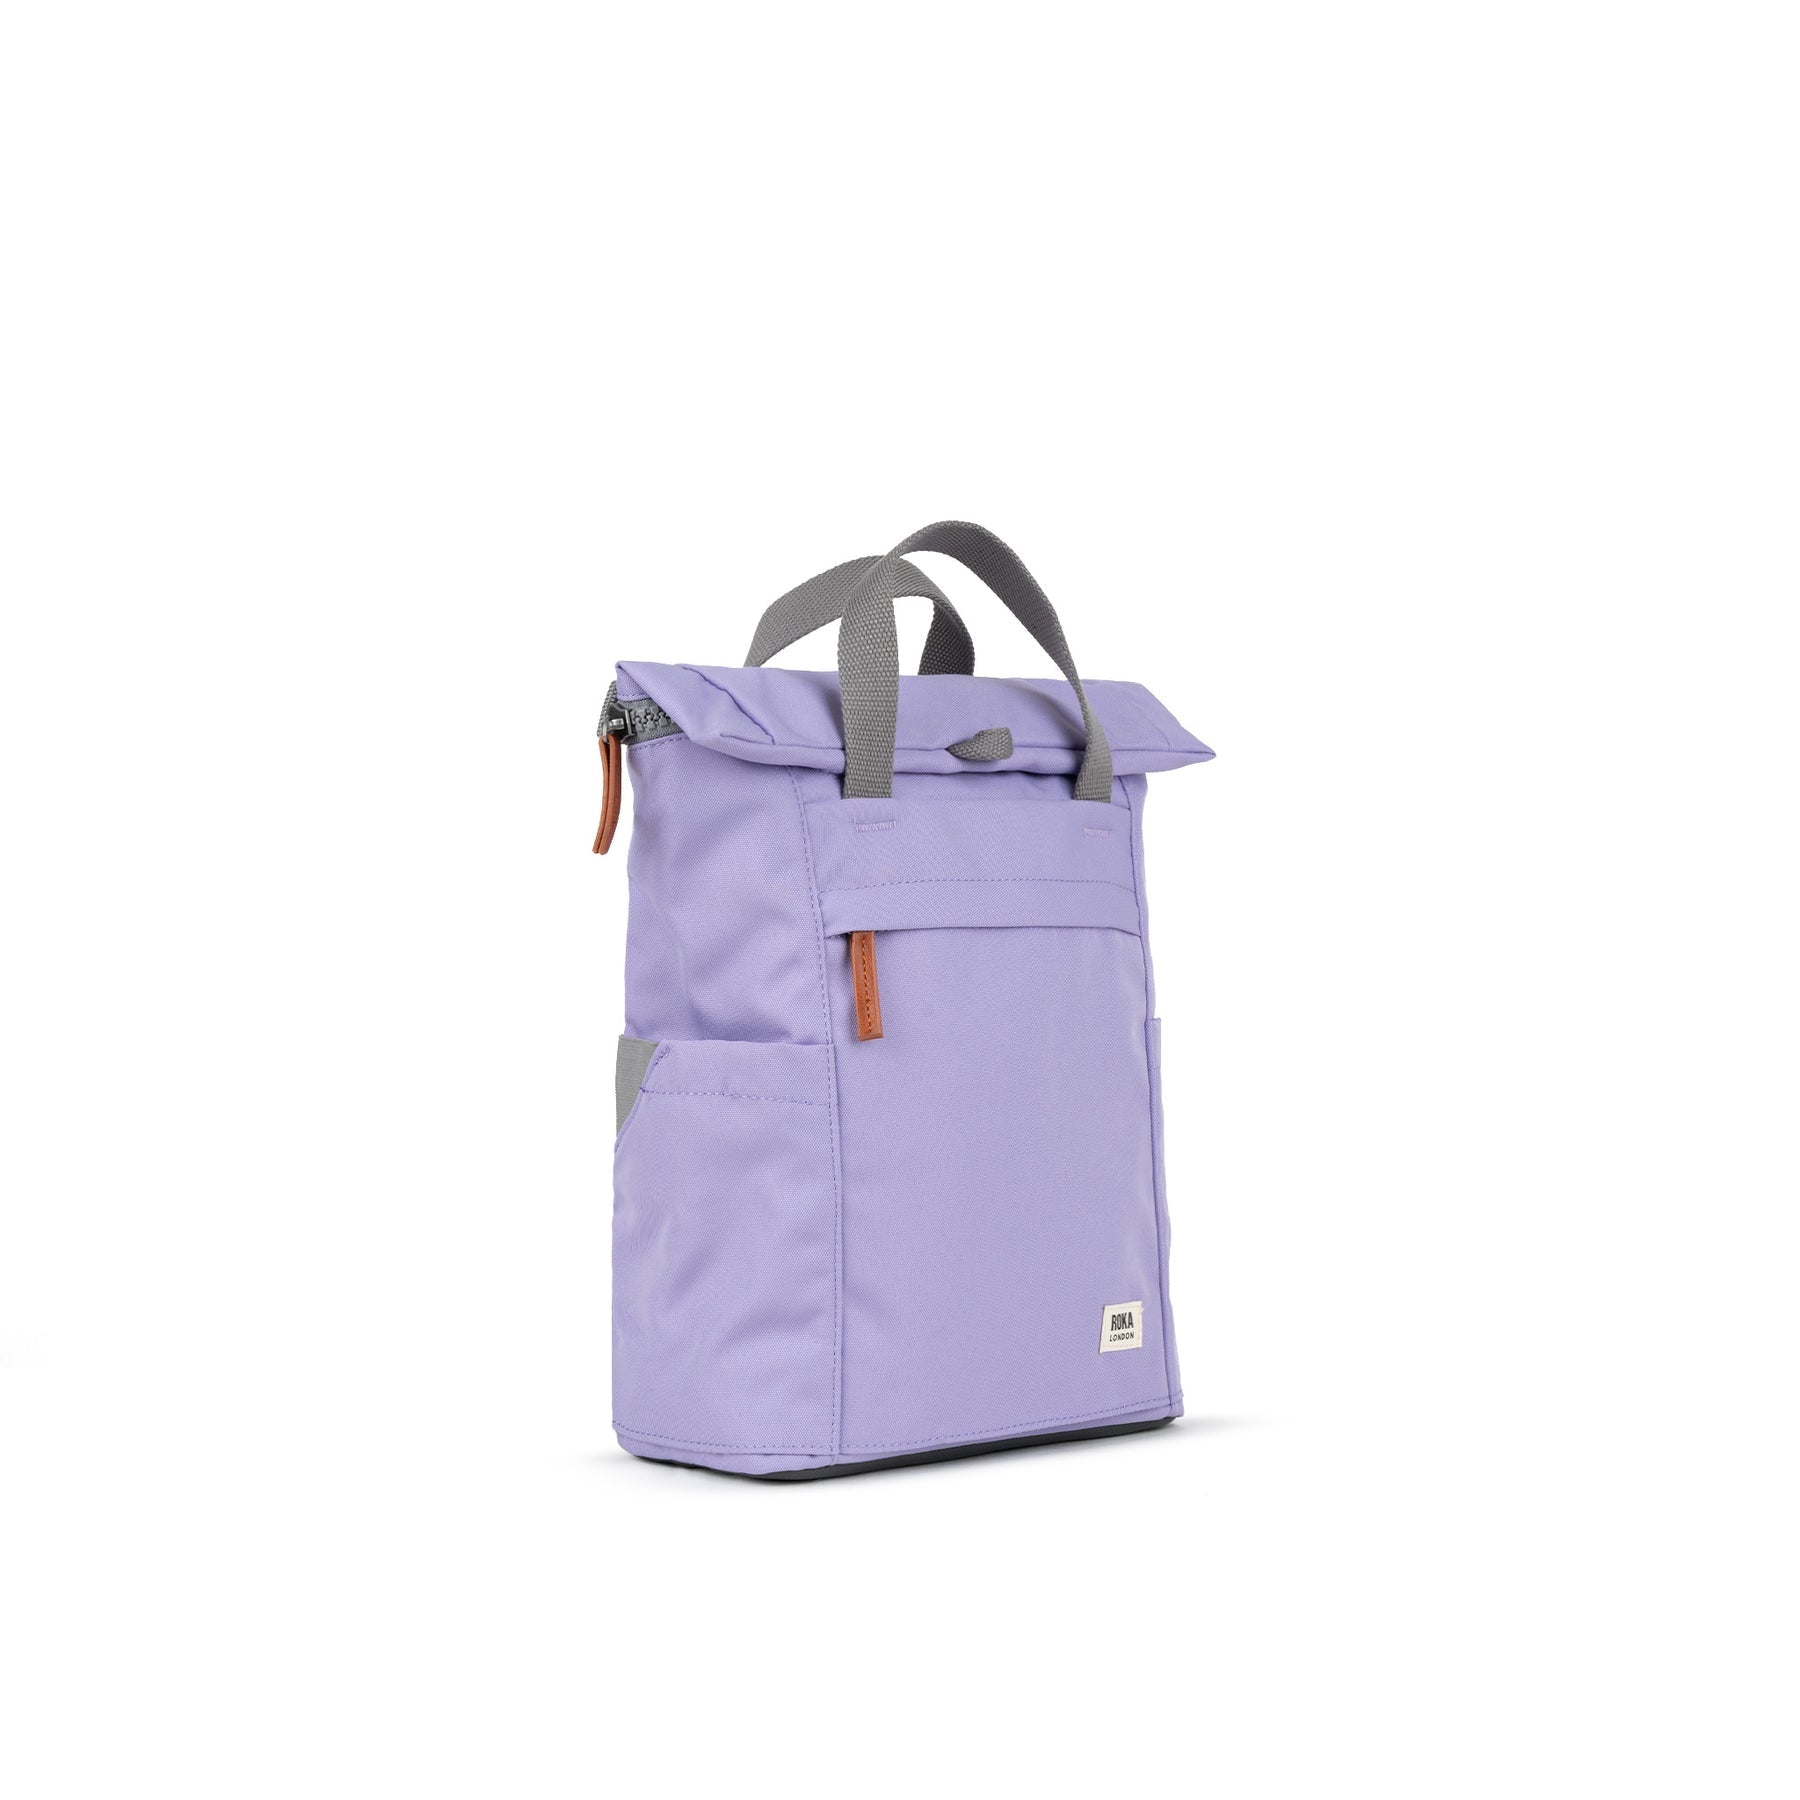 ROKA Finchley A Lavender Small Recycled Canvas Bag